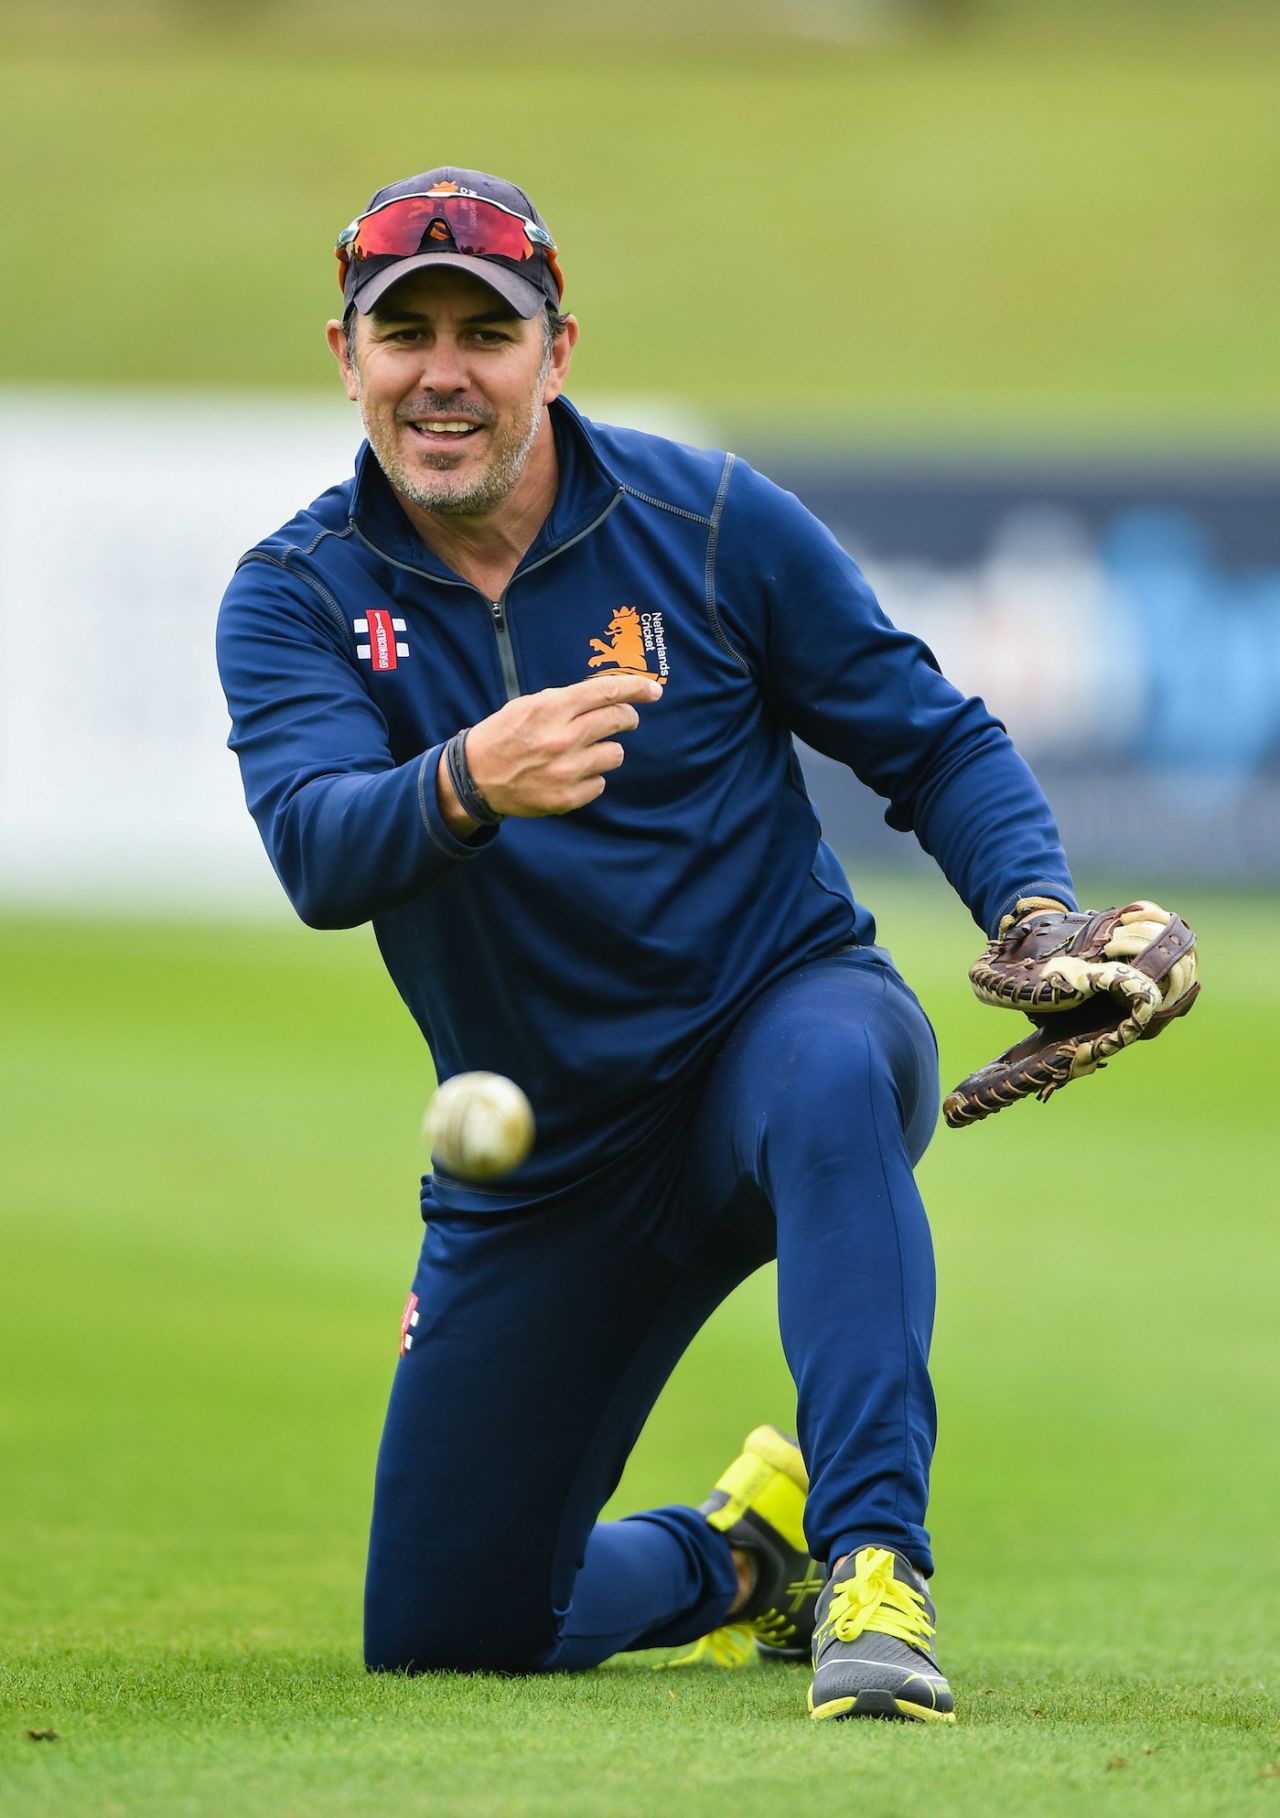 Netherlands head coach Ryan Campbell during a training session, Dublin, September 16, 2019